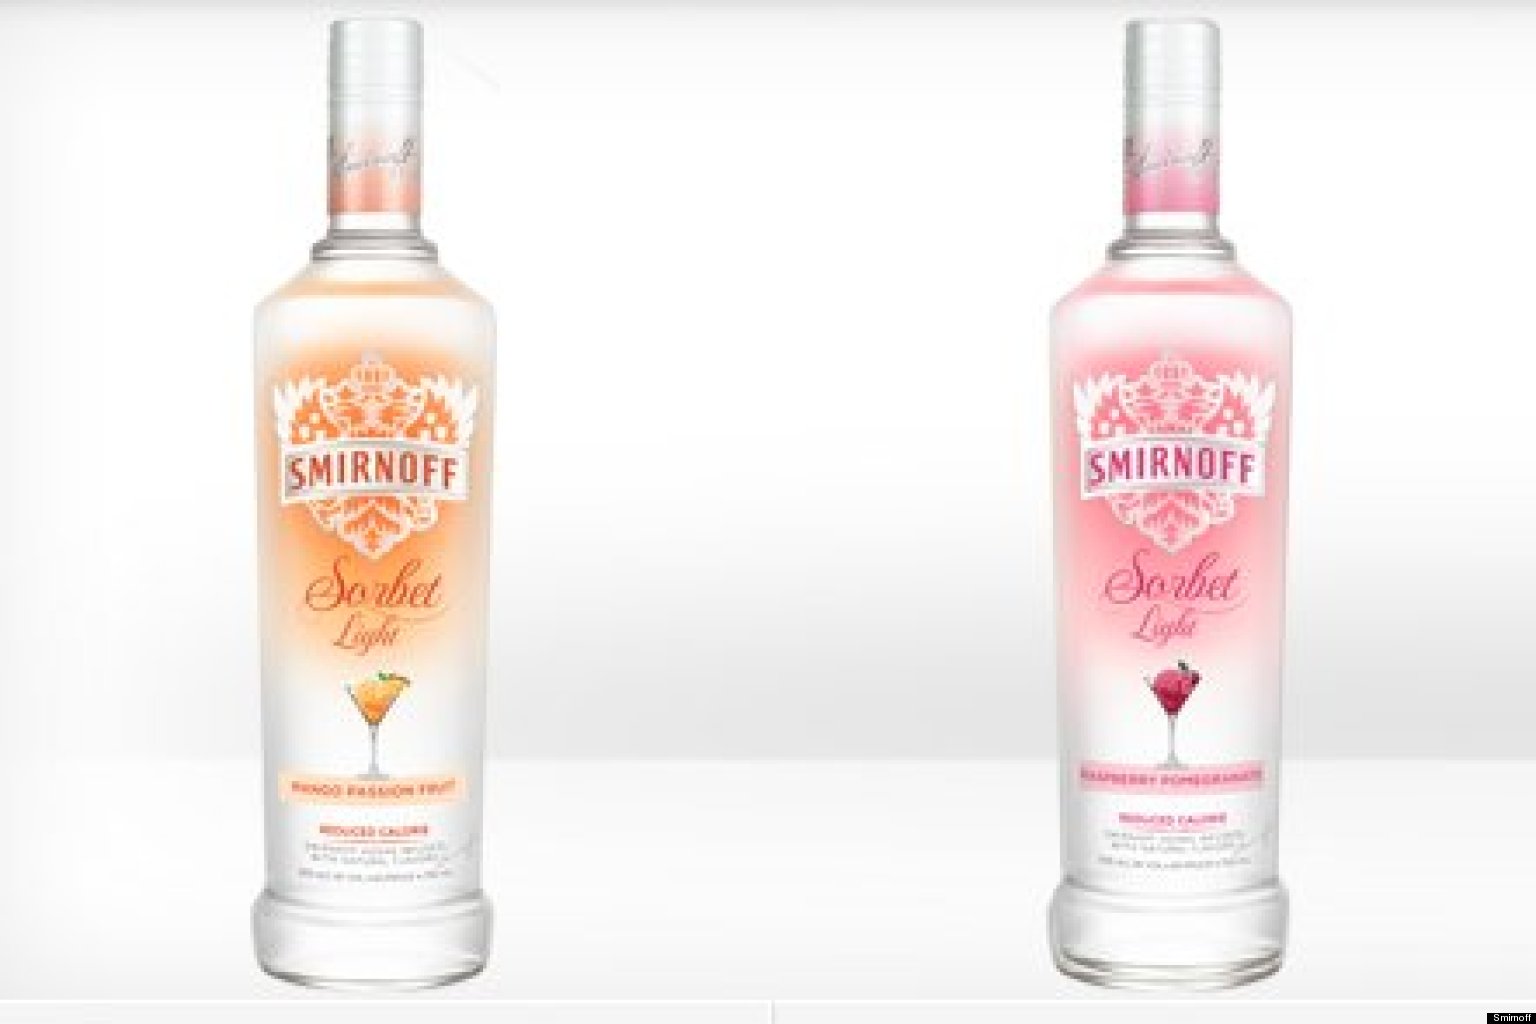 Flavored Vodka Companies Continue To Debut New Flavors